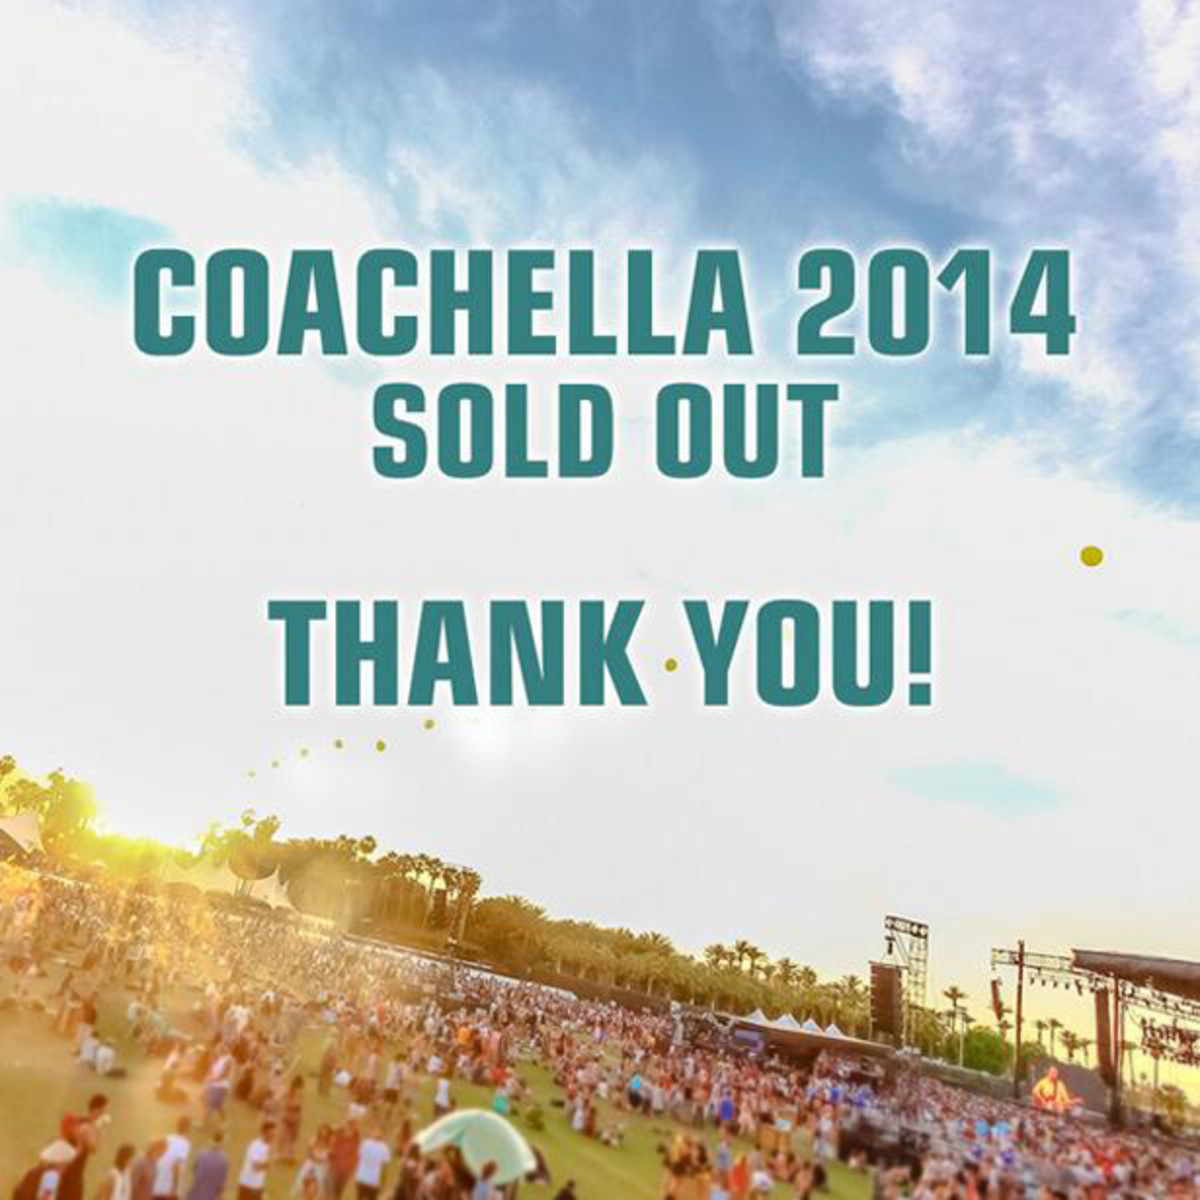 Both Weekends Of Coachella Sell Out In Less Than Three Hours - EDM News